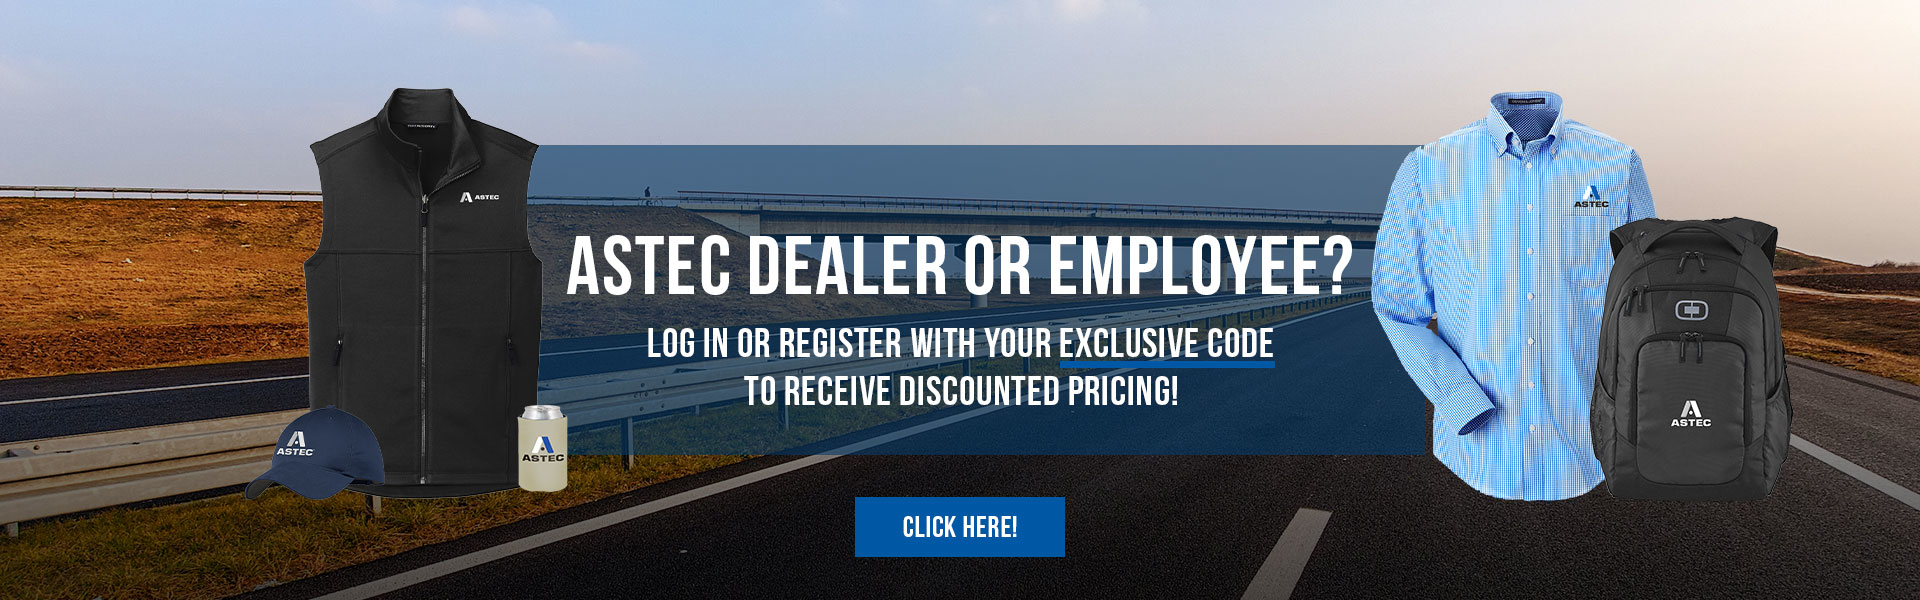 ASTEC dealer or employee? Log in or register with your exclusive code to receive discounted pricing!